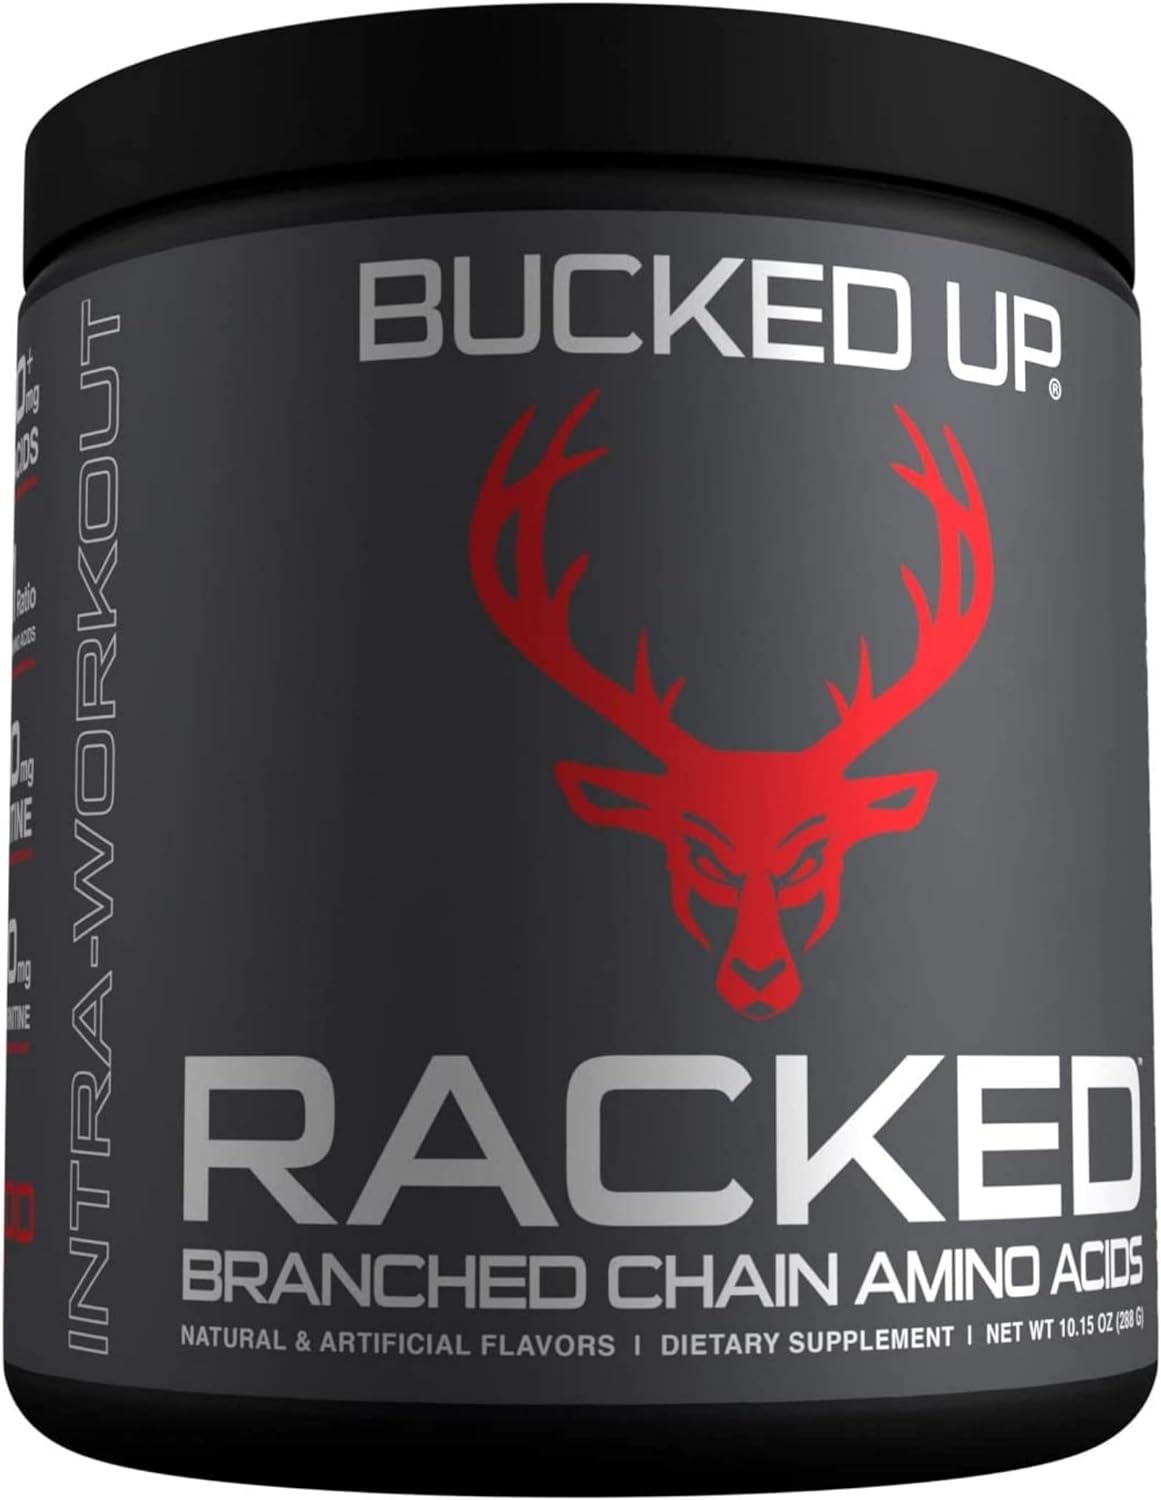 Bucked Up- BCAA RACKED? Branch Chained Amino Acids | L-Carnitine, Acetyl L-Carnitine, GBB | Post Workout Recovery, Protein Synthesis, Lean Muscle BCAAs That You Can Feel! 30 Servings (Blood Raz)